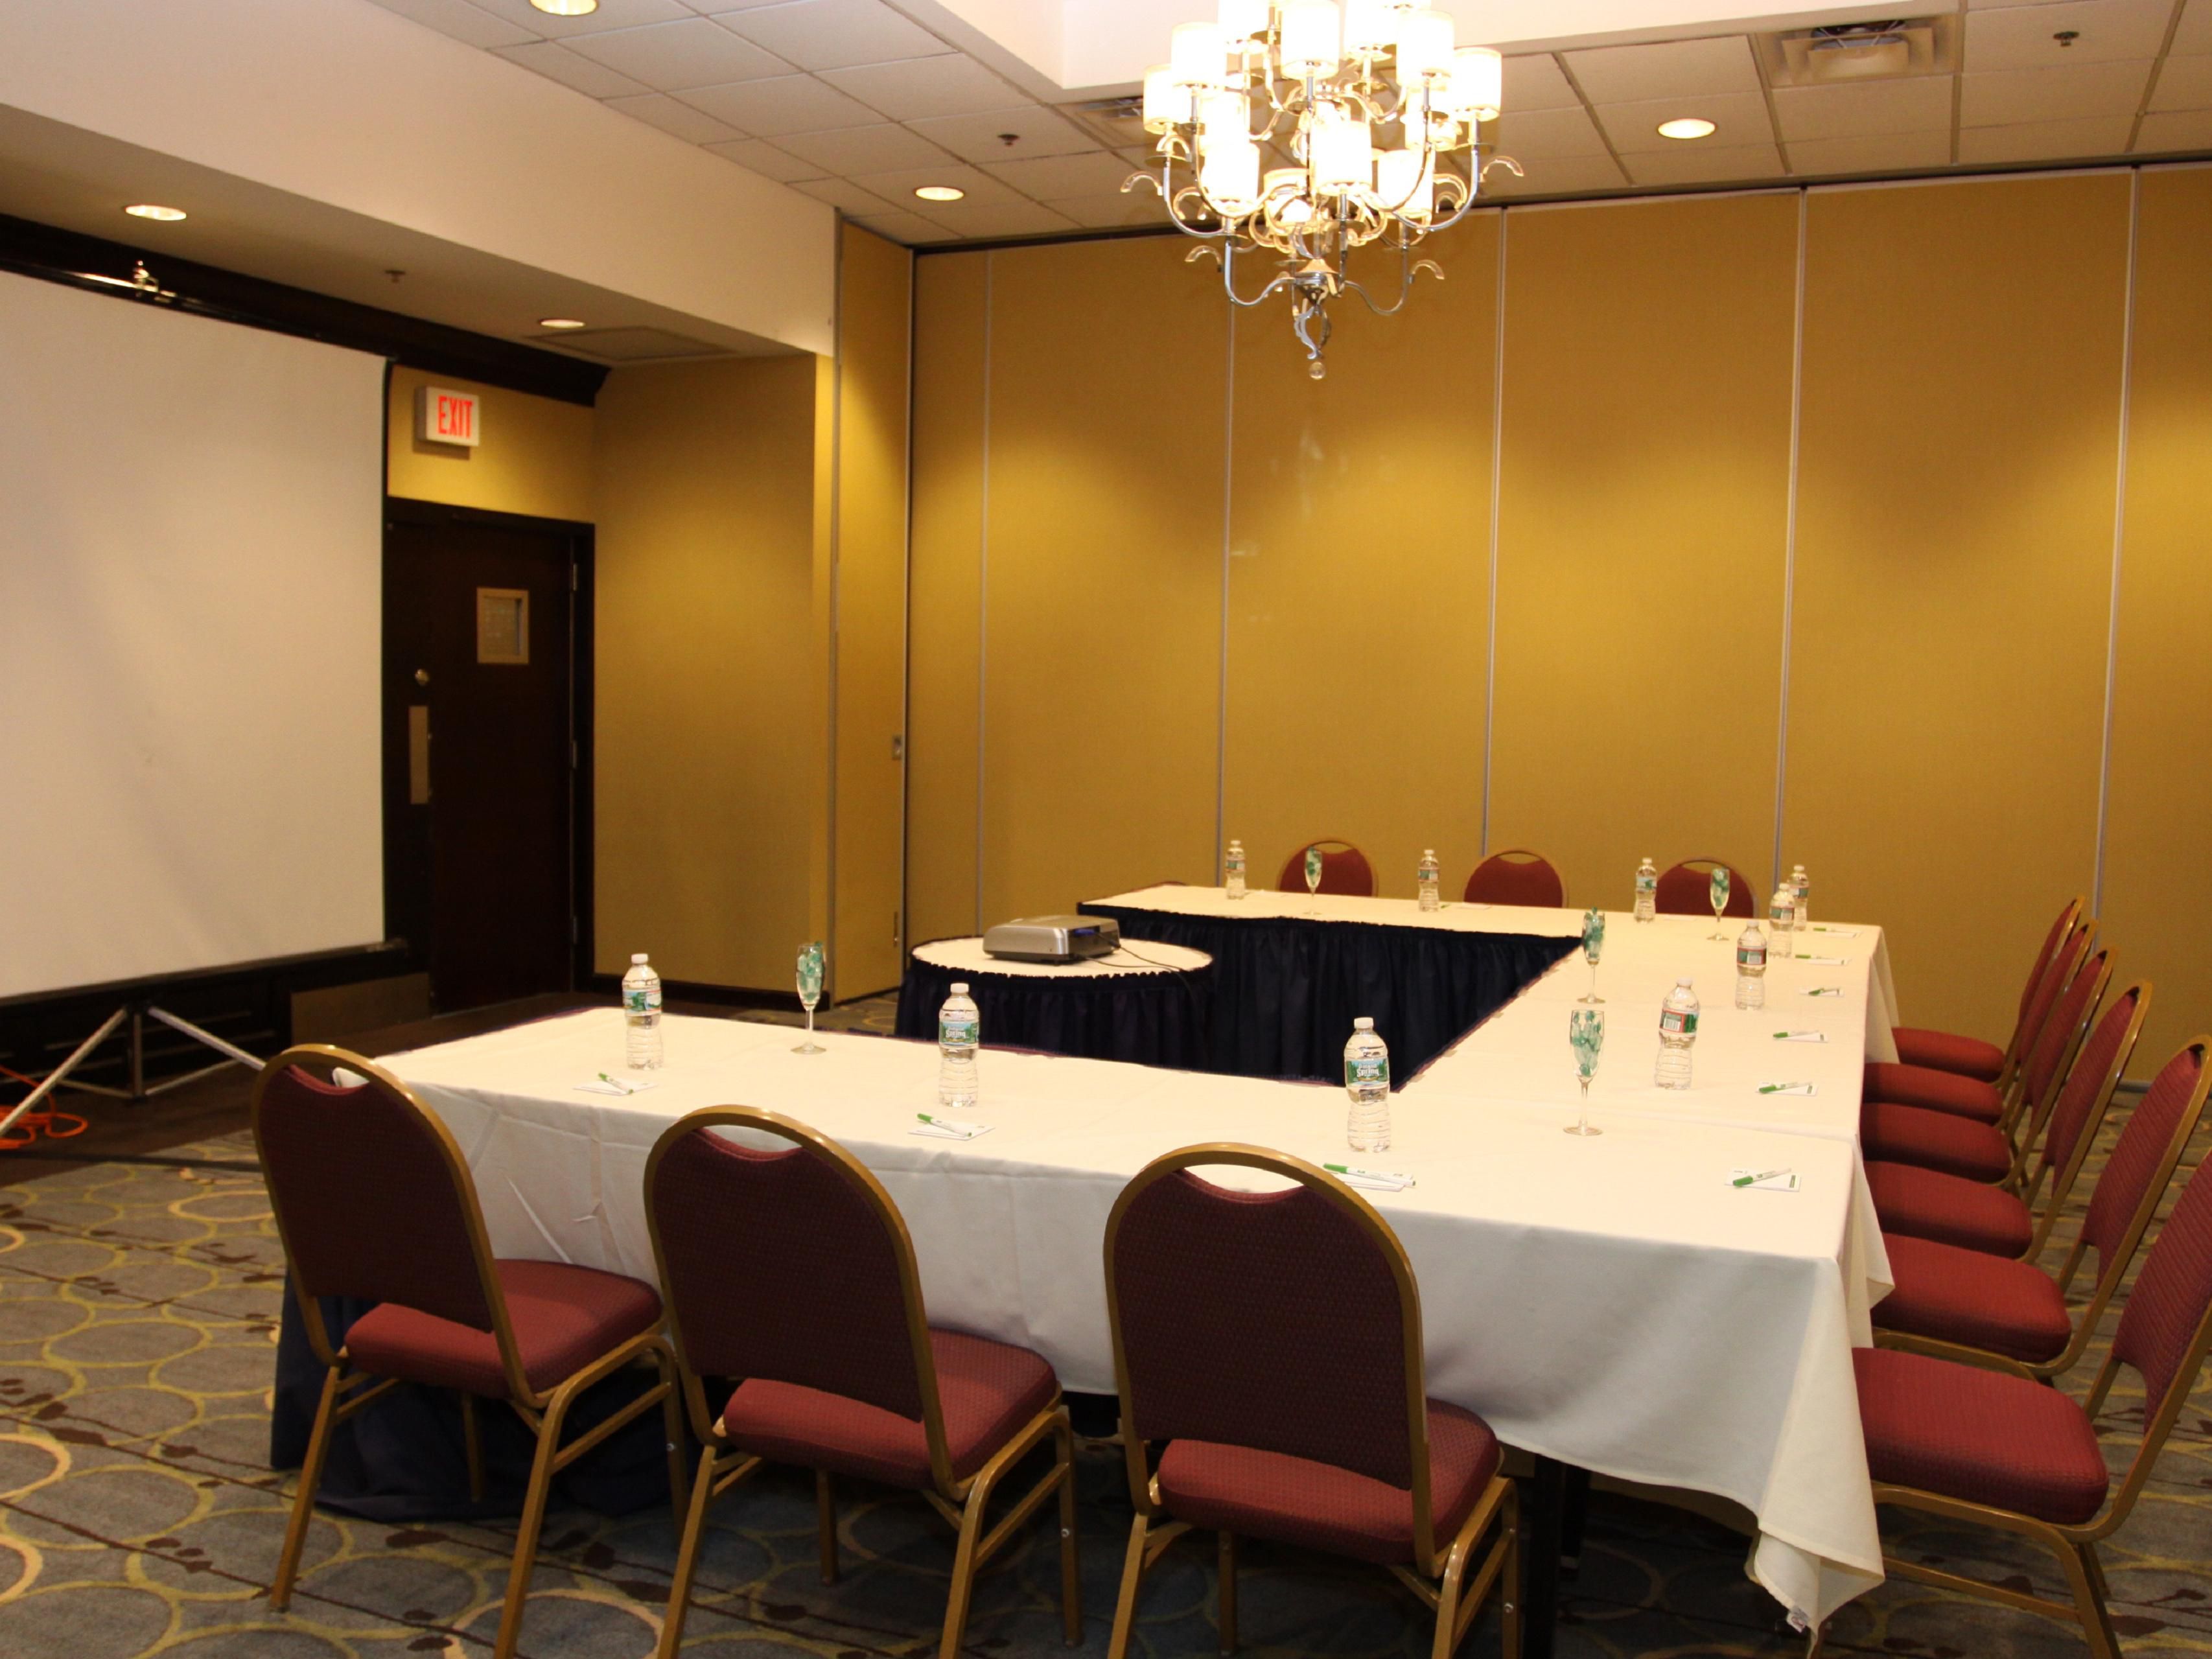 Contact the Holiday Inn Budd Lake - Rockaway Area for all of your meeting needs.  Let us take care of the details to make your time as productive as possible.